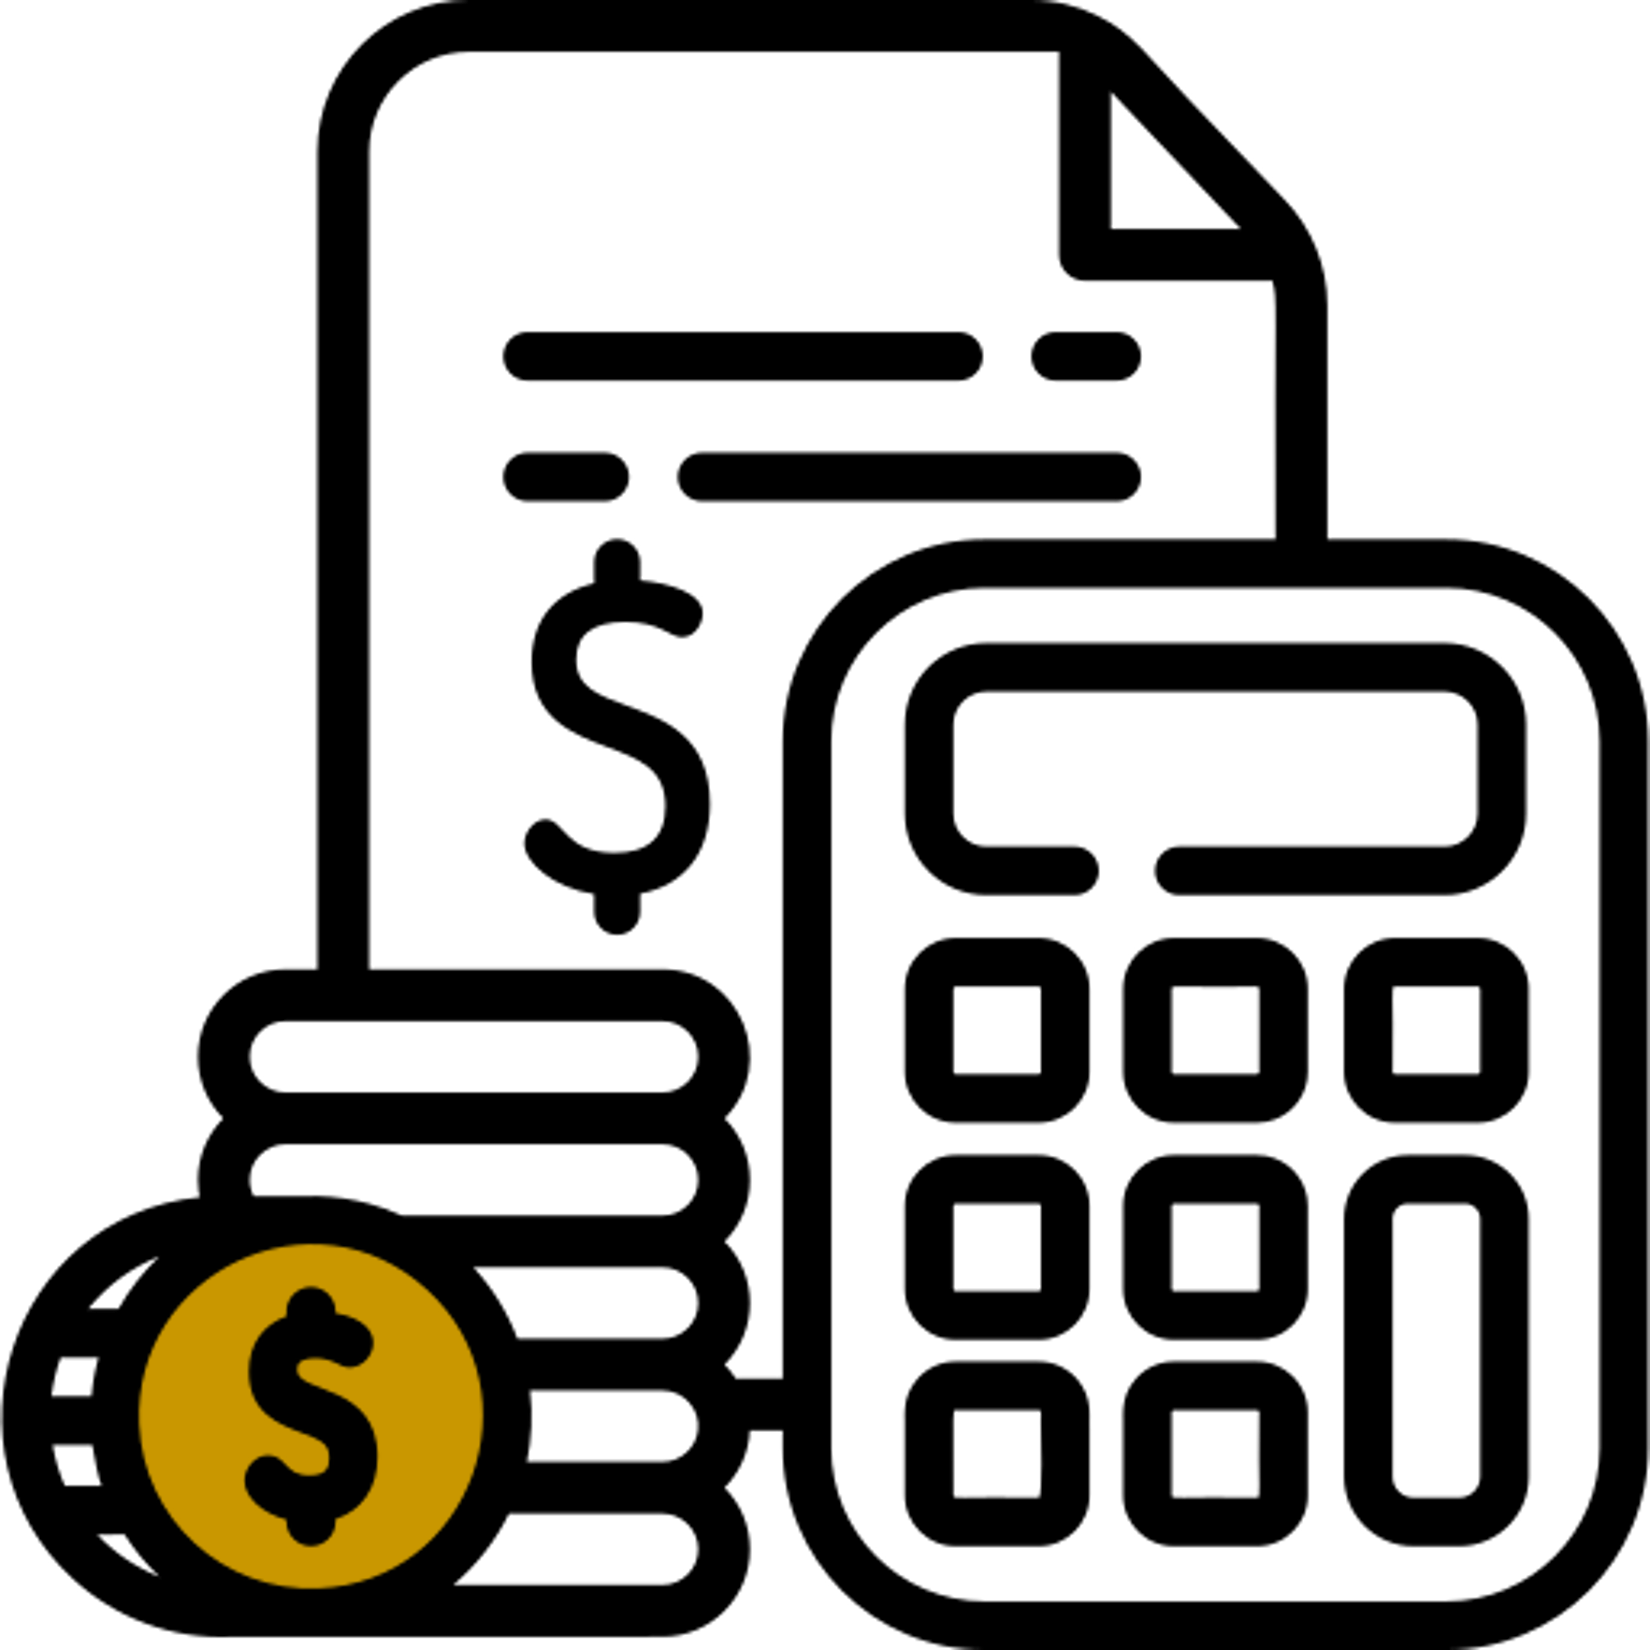 Outline icon of dollars, ledgers and calculator.